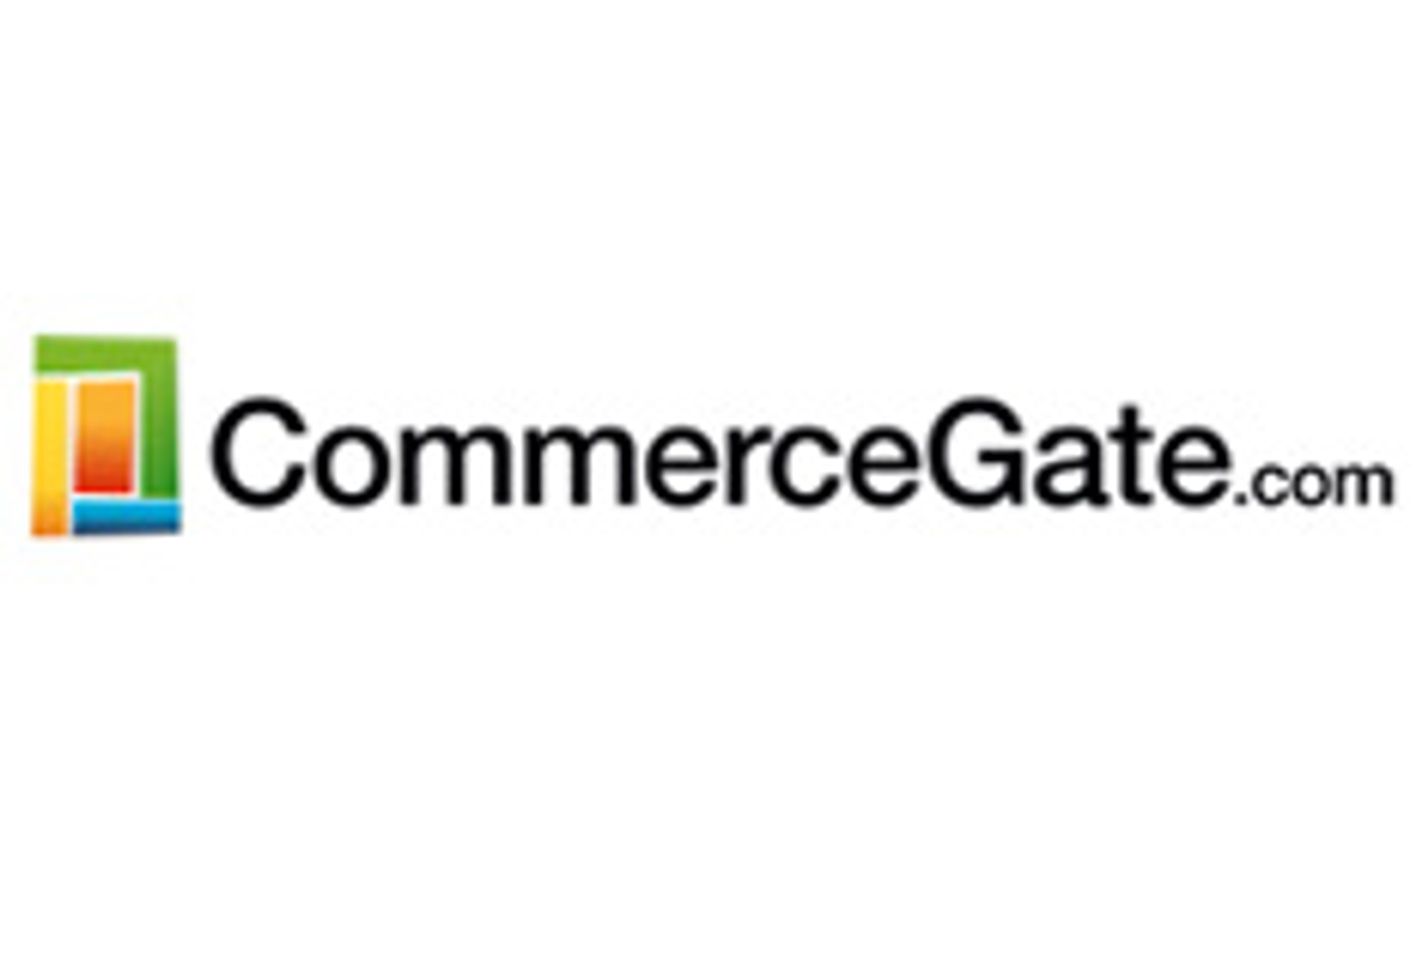 CommerceGate Shopping Cart Support Extends to Virtually All Platforms